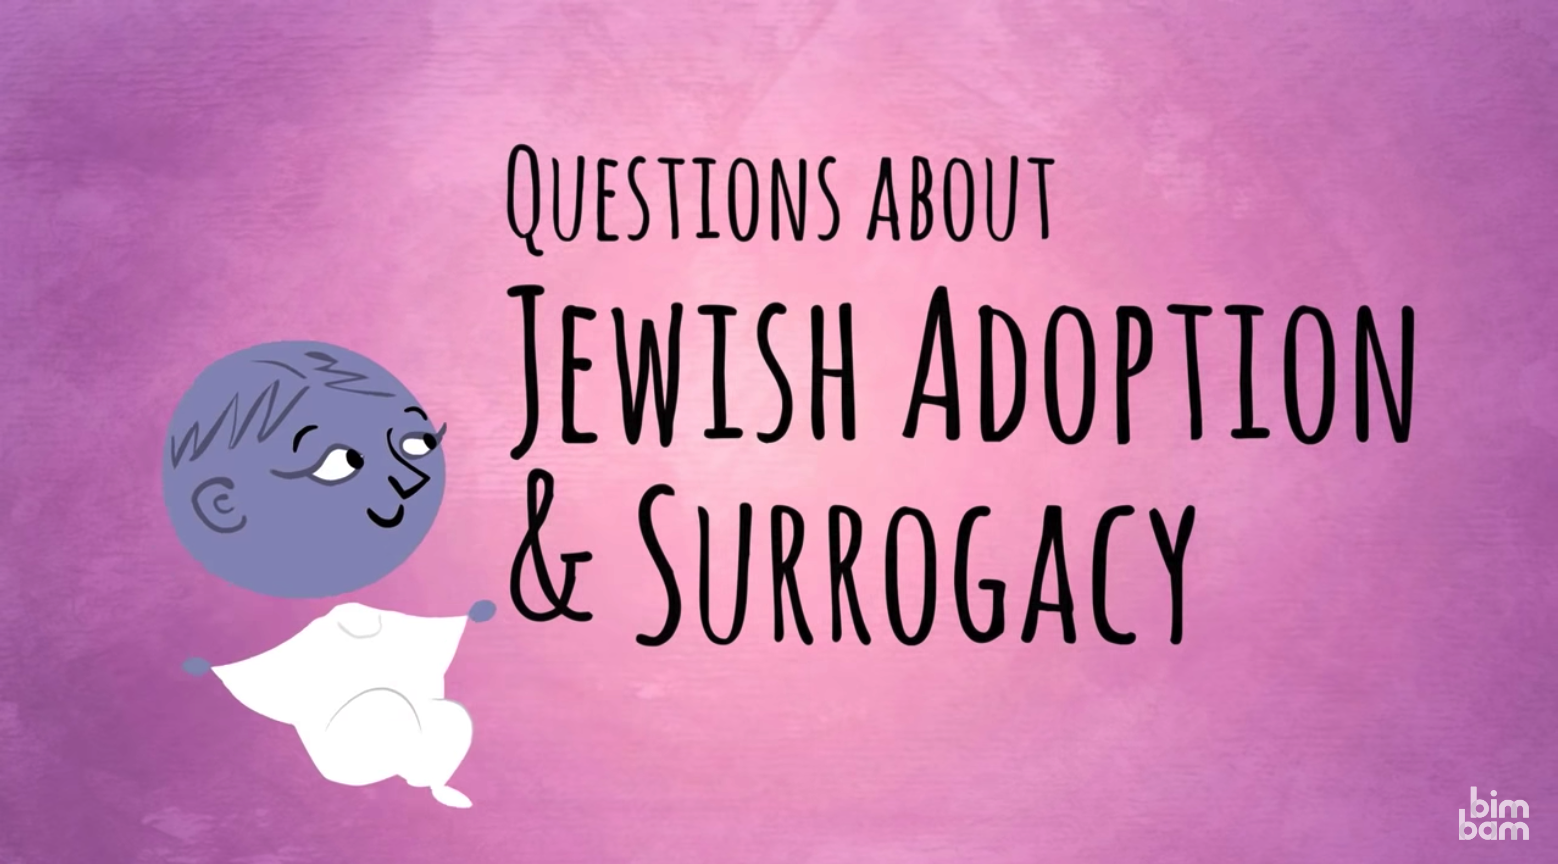 questions about jewish adoption & surrogacy